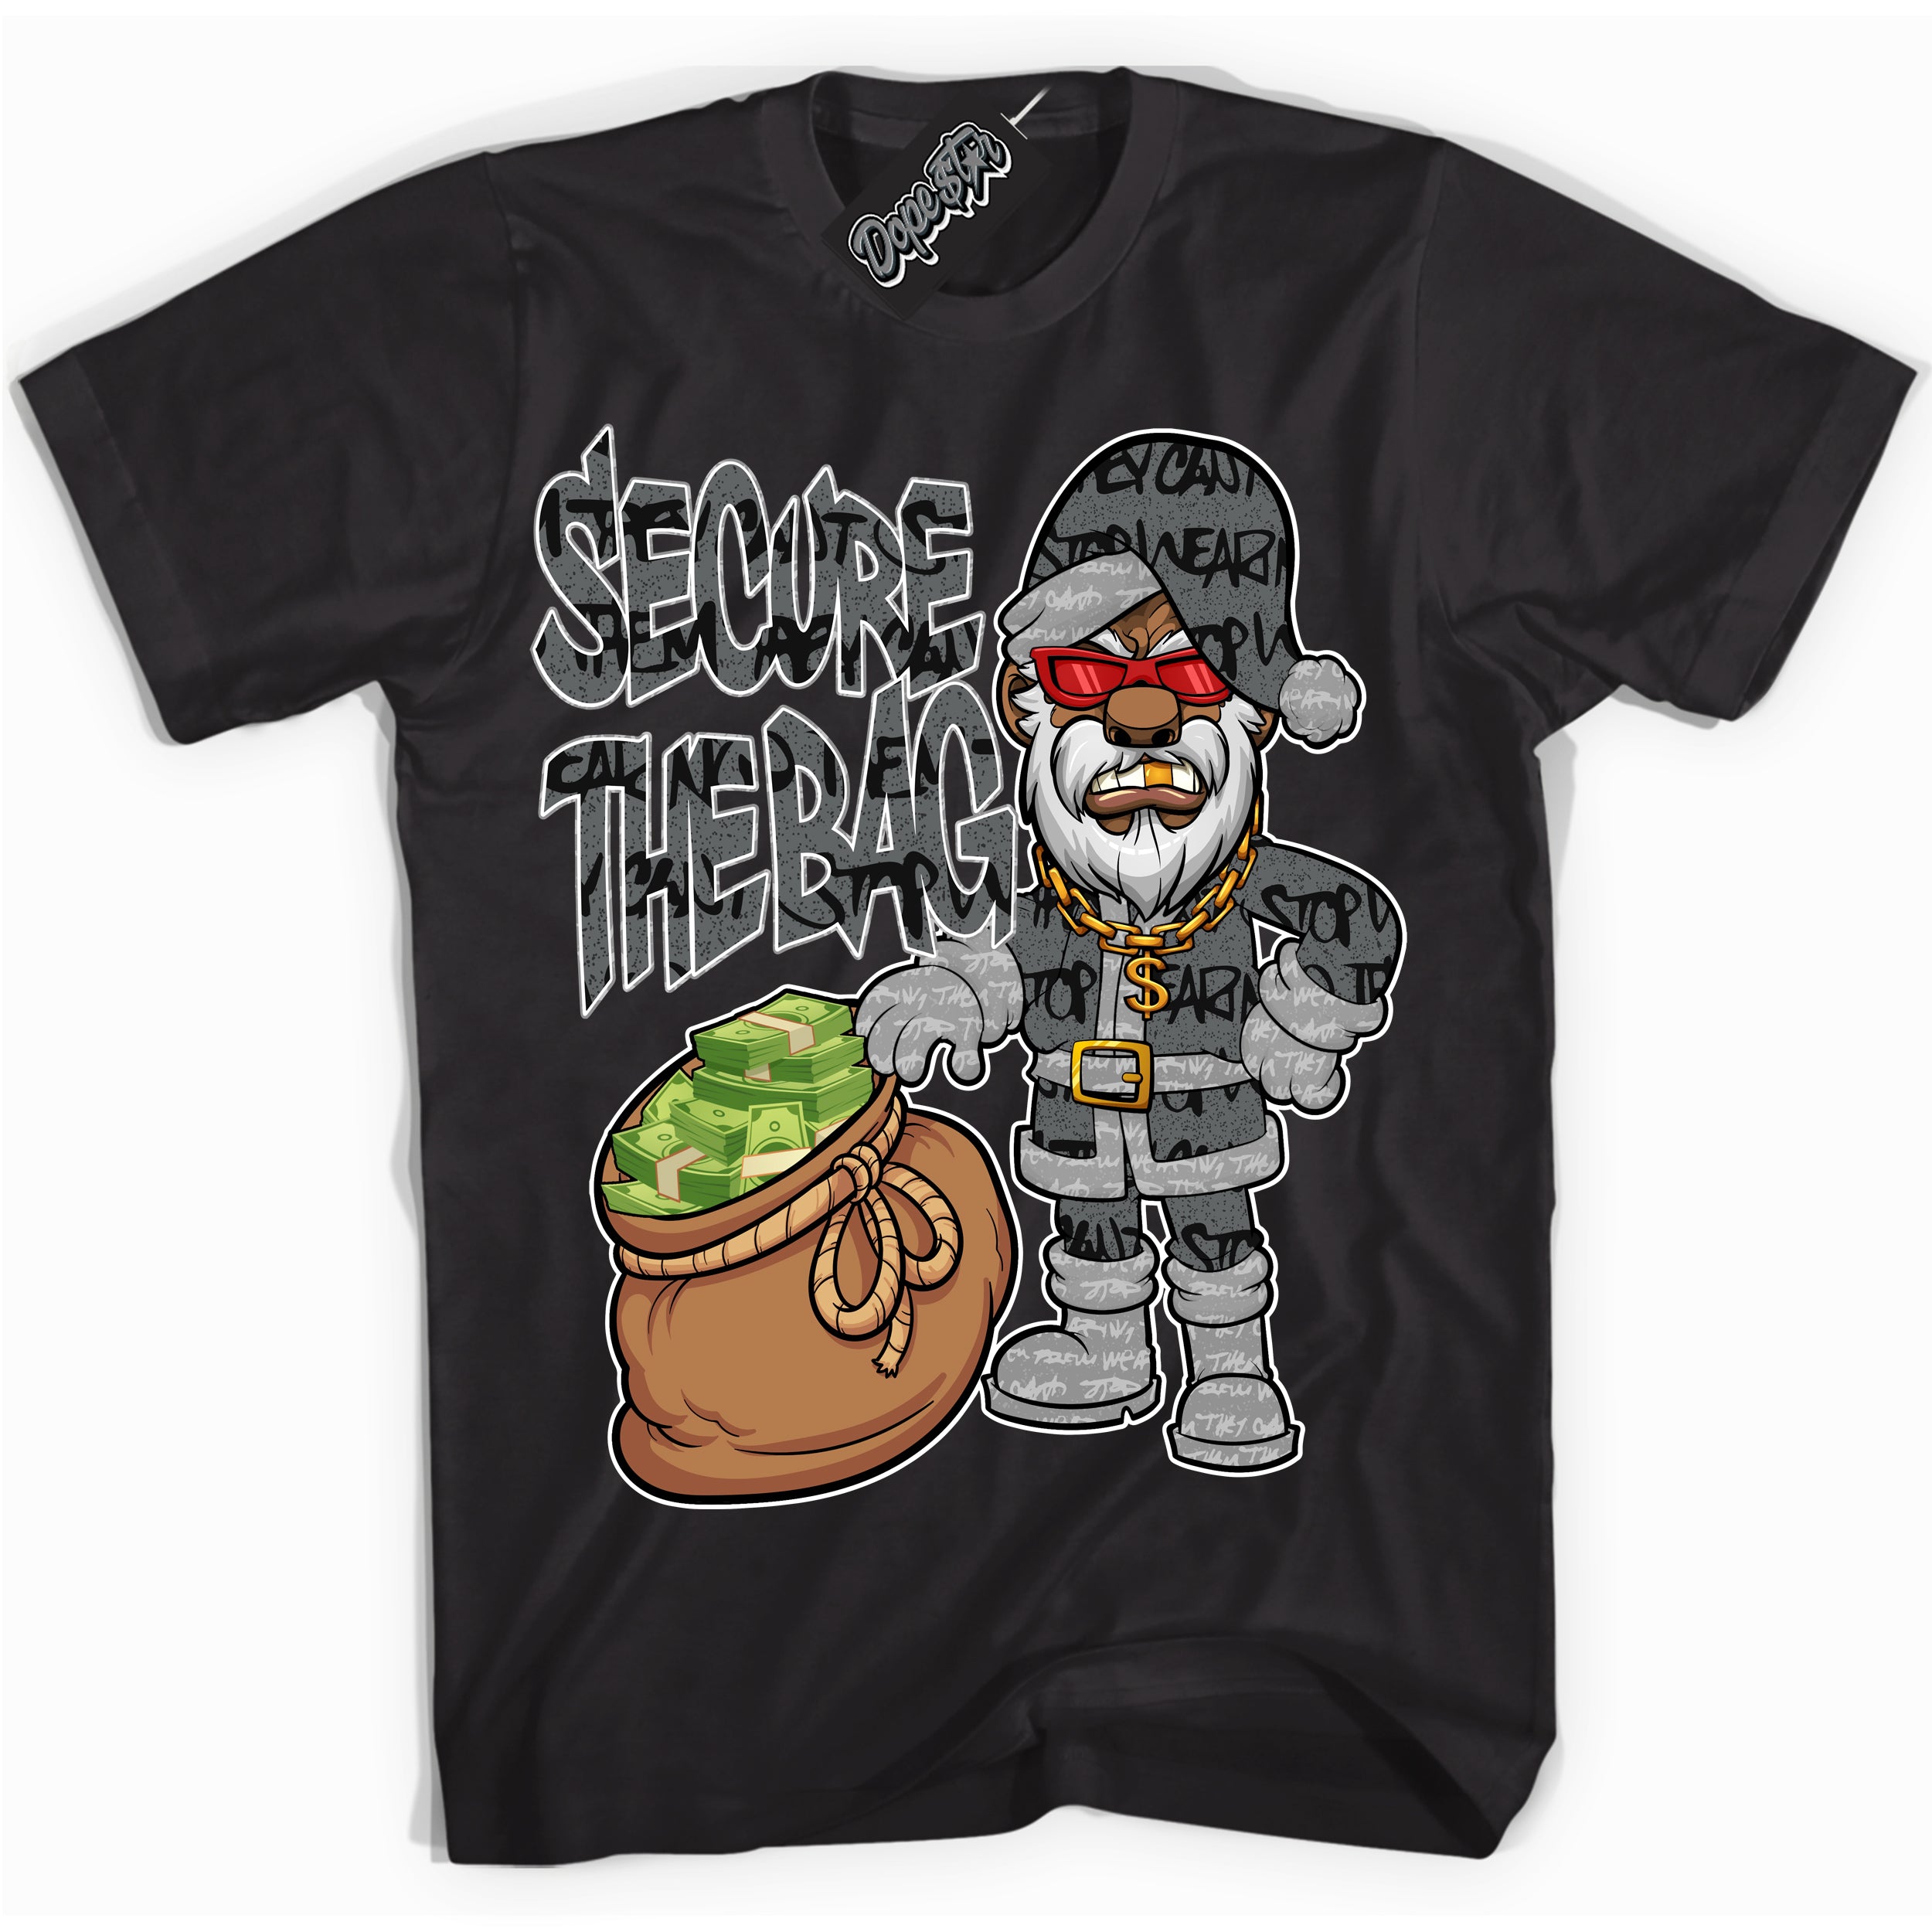 Cool Black Shirt with “ Secure The Bag Santa ” design that perfectly matches Rebellionaire 1s Sneakers.